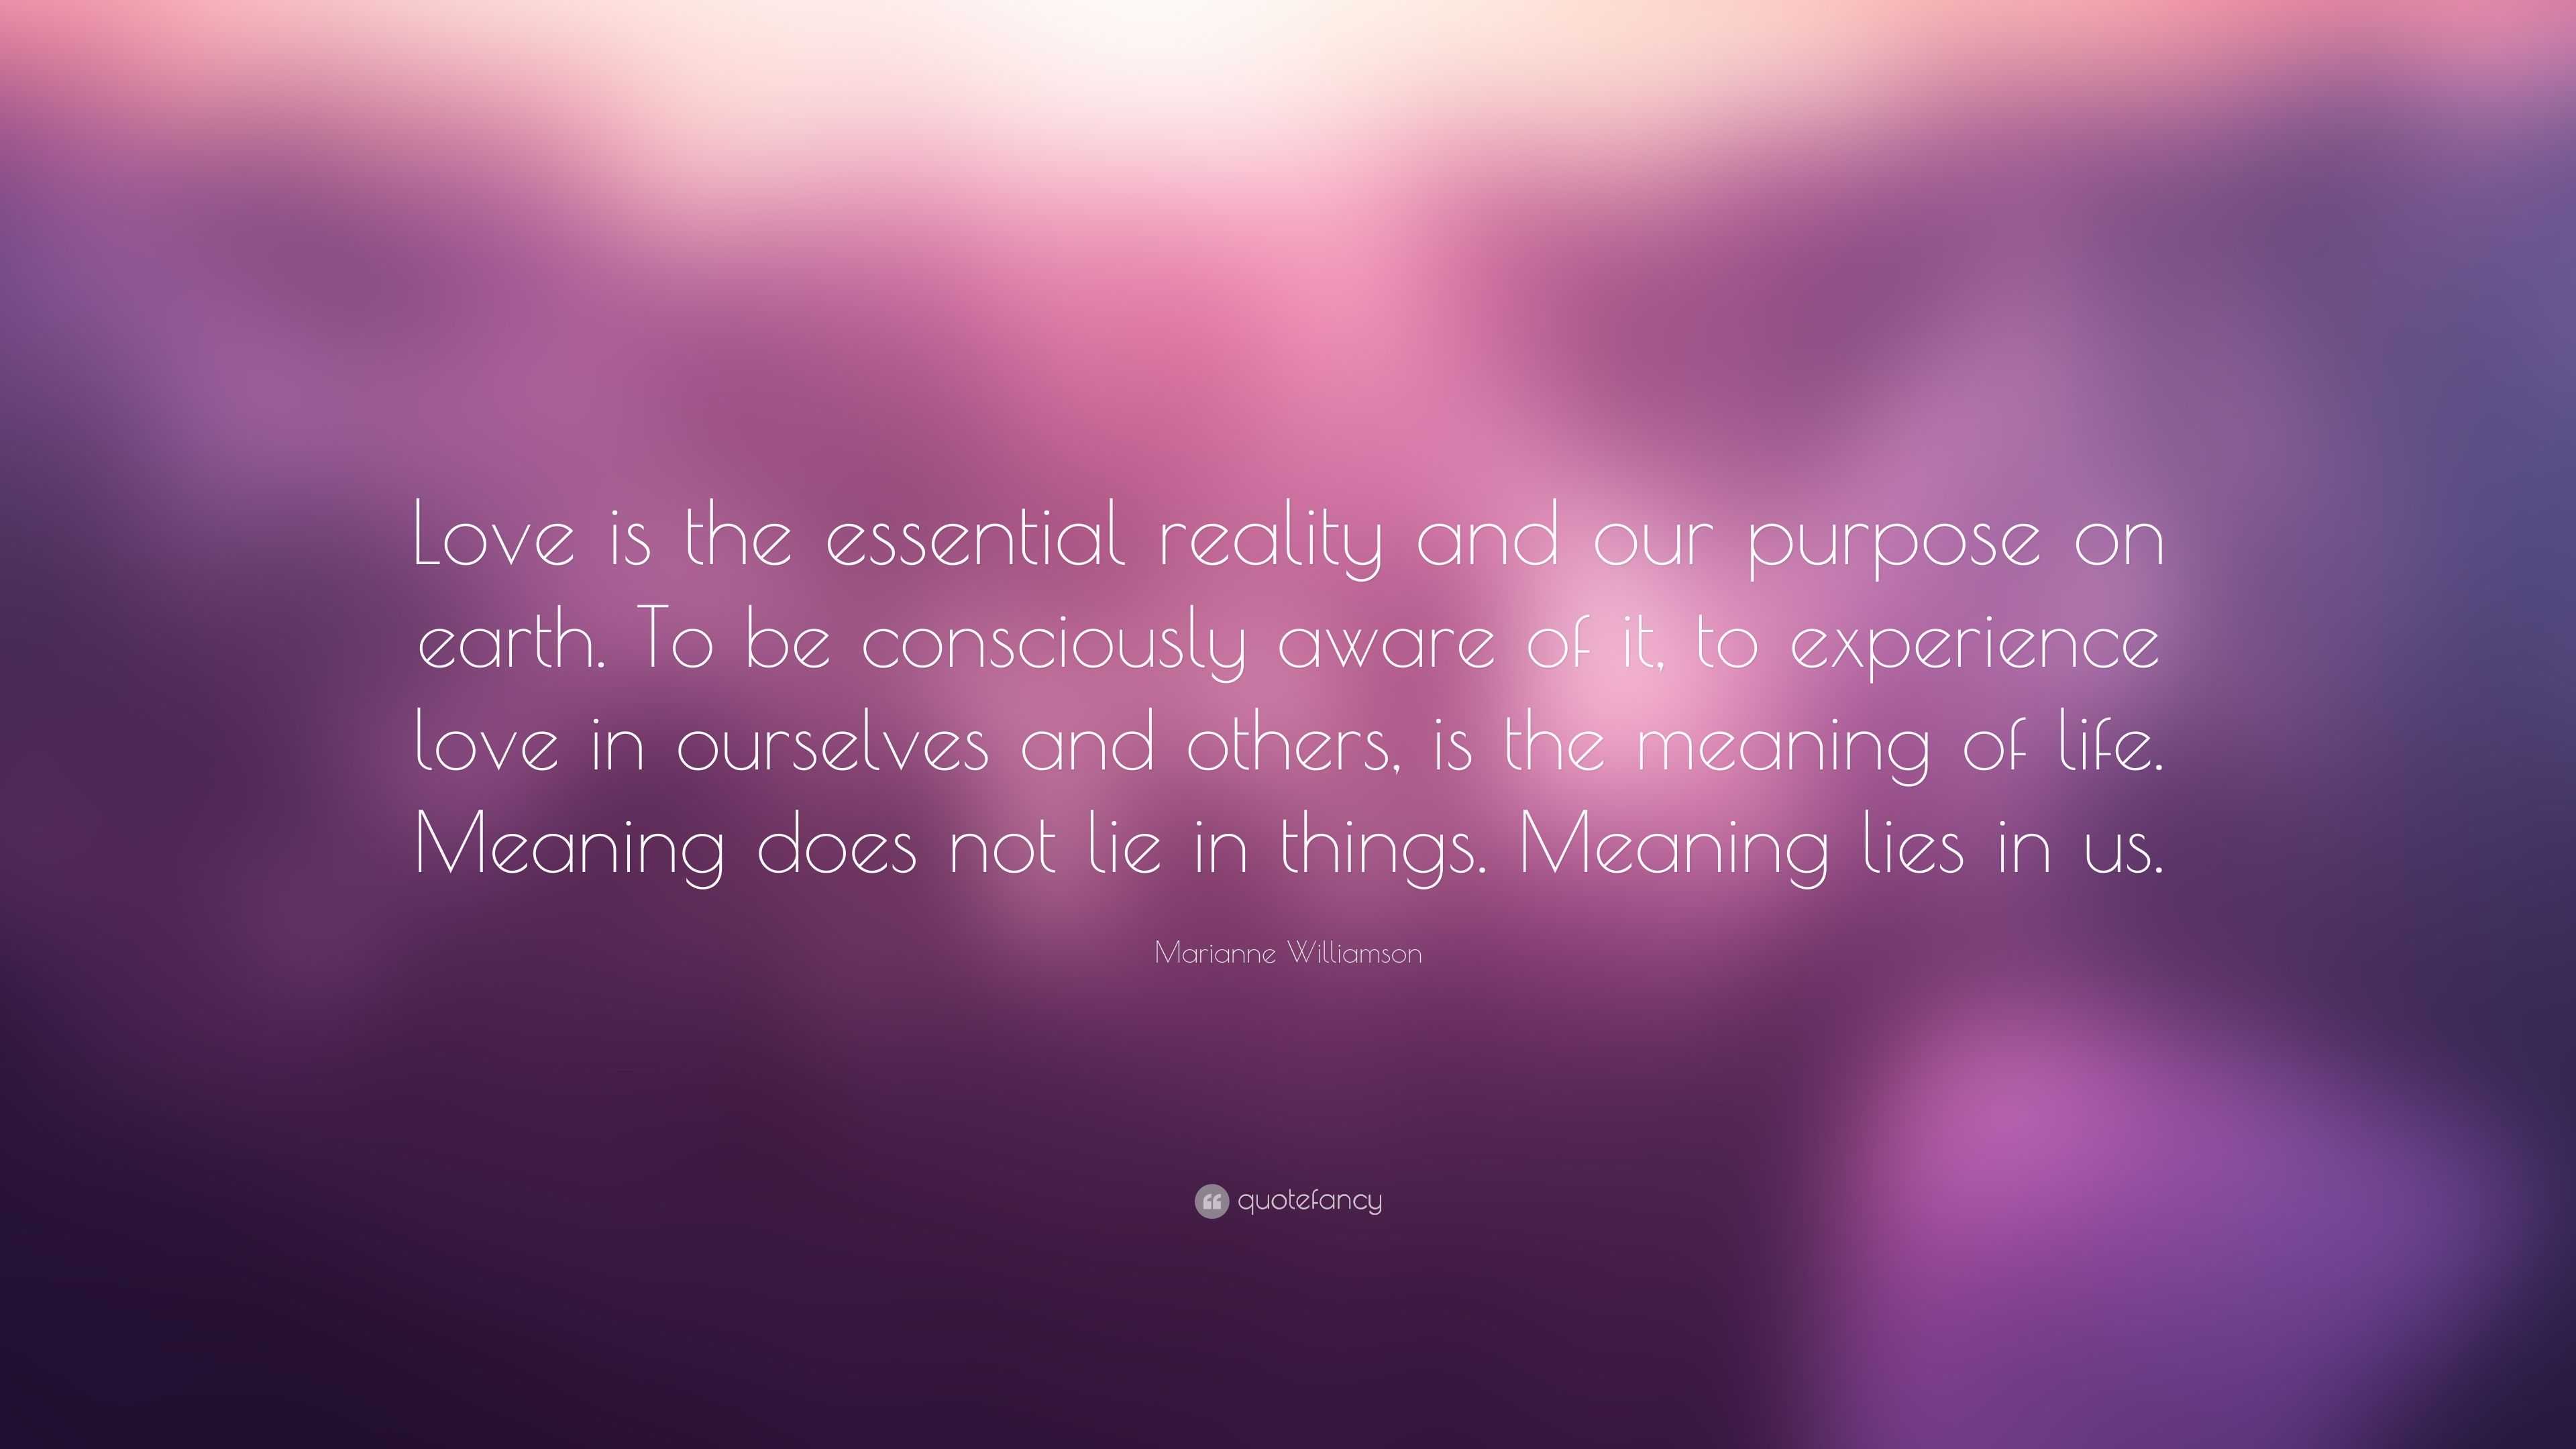 Marianne Williamson Quote: “Love is the essential reality and our ...